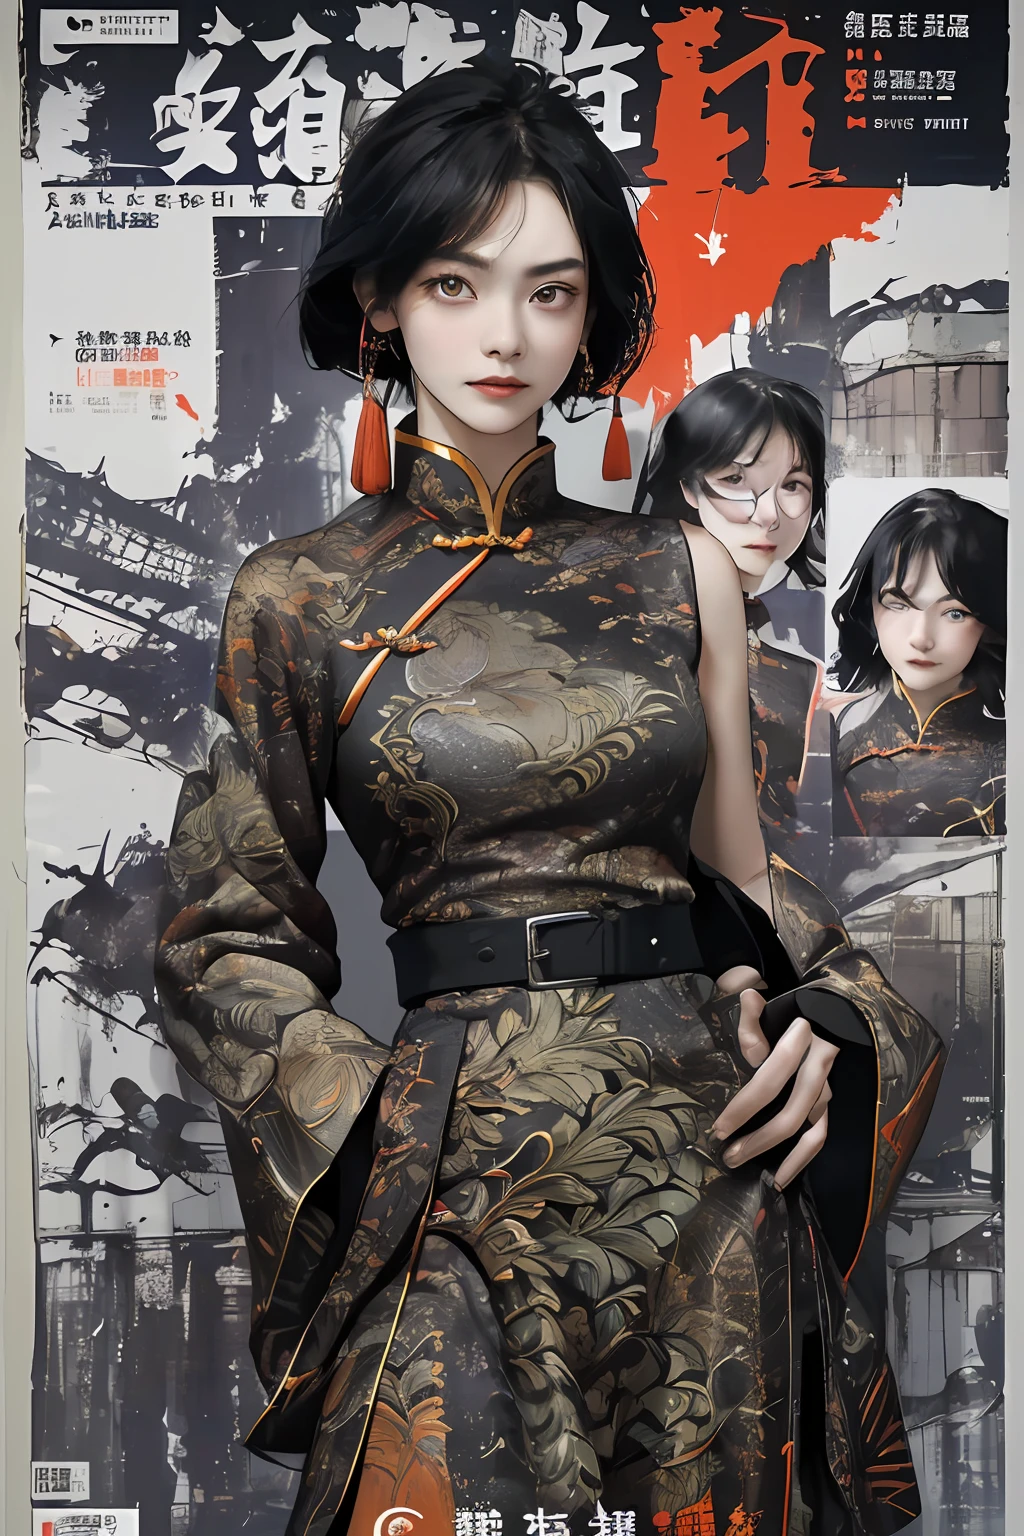 ((((Dramatic))), (((grittiness))), (((Intense))) The movie poster features a young woman as the central character。She stands confidently in the center of the poster，Wear Chinese warrior clothing，with a determined expression on her face。The background is dark and gritty，There is a sense of danger and a strong feeling。The text is bold and eye-catching，With catchy slogans，Adds to the overall drama and excitement。The color palette is dominated by dark colors，Dotted with bright colorake the poster dynamic and visually striking，tachi-e (Magazines:1.3), (Cover-style:1.3), Fashionab, woman, vibrant, Outfit, posing on a, Front,rich colourful，dyna，Background with，Chinese elements，self-assured，Expressing the，halter，statement，Attachment，A majestic，coil，Runt，Touching pubic area，Scenes，text，Cover of a，boldness，attention-grabbing，